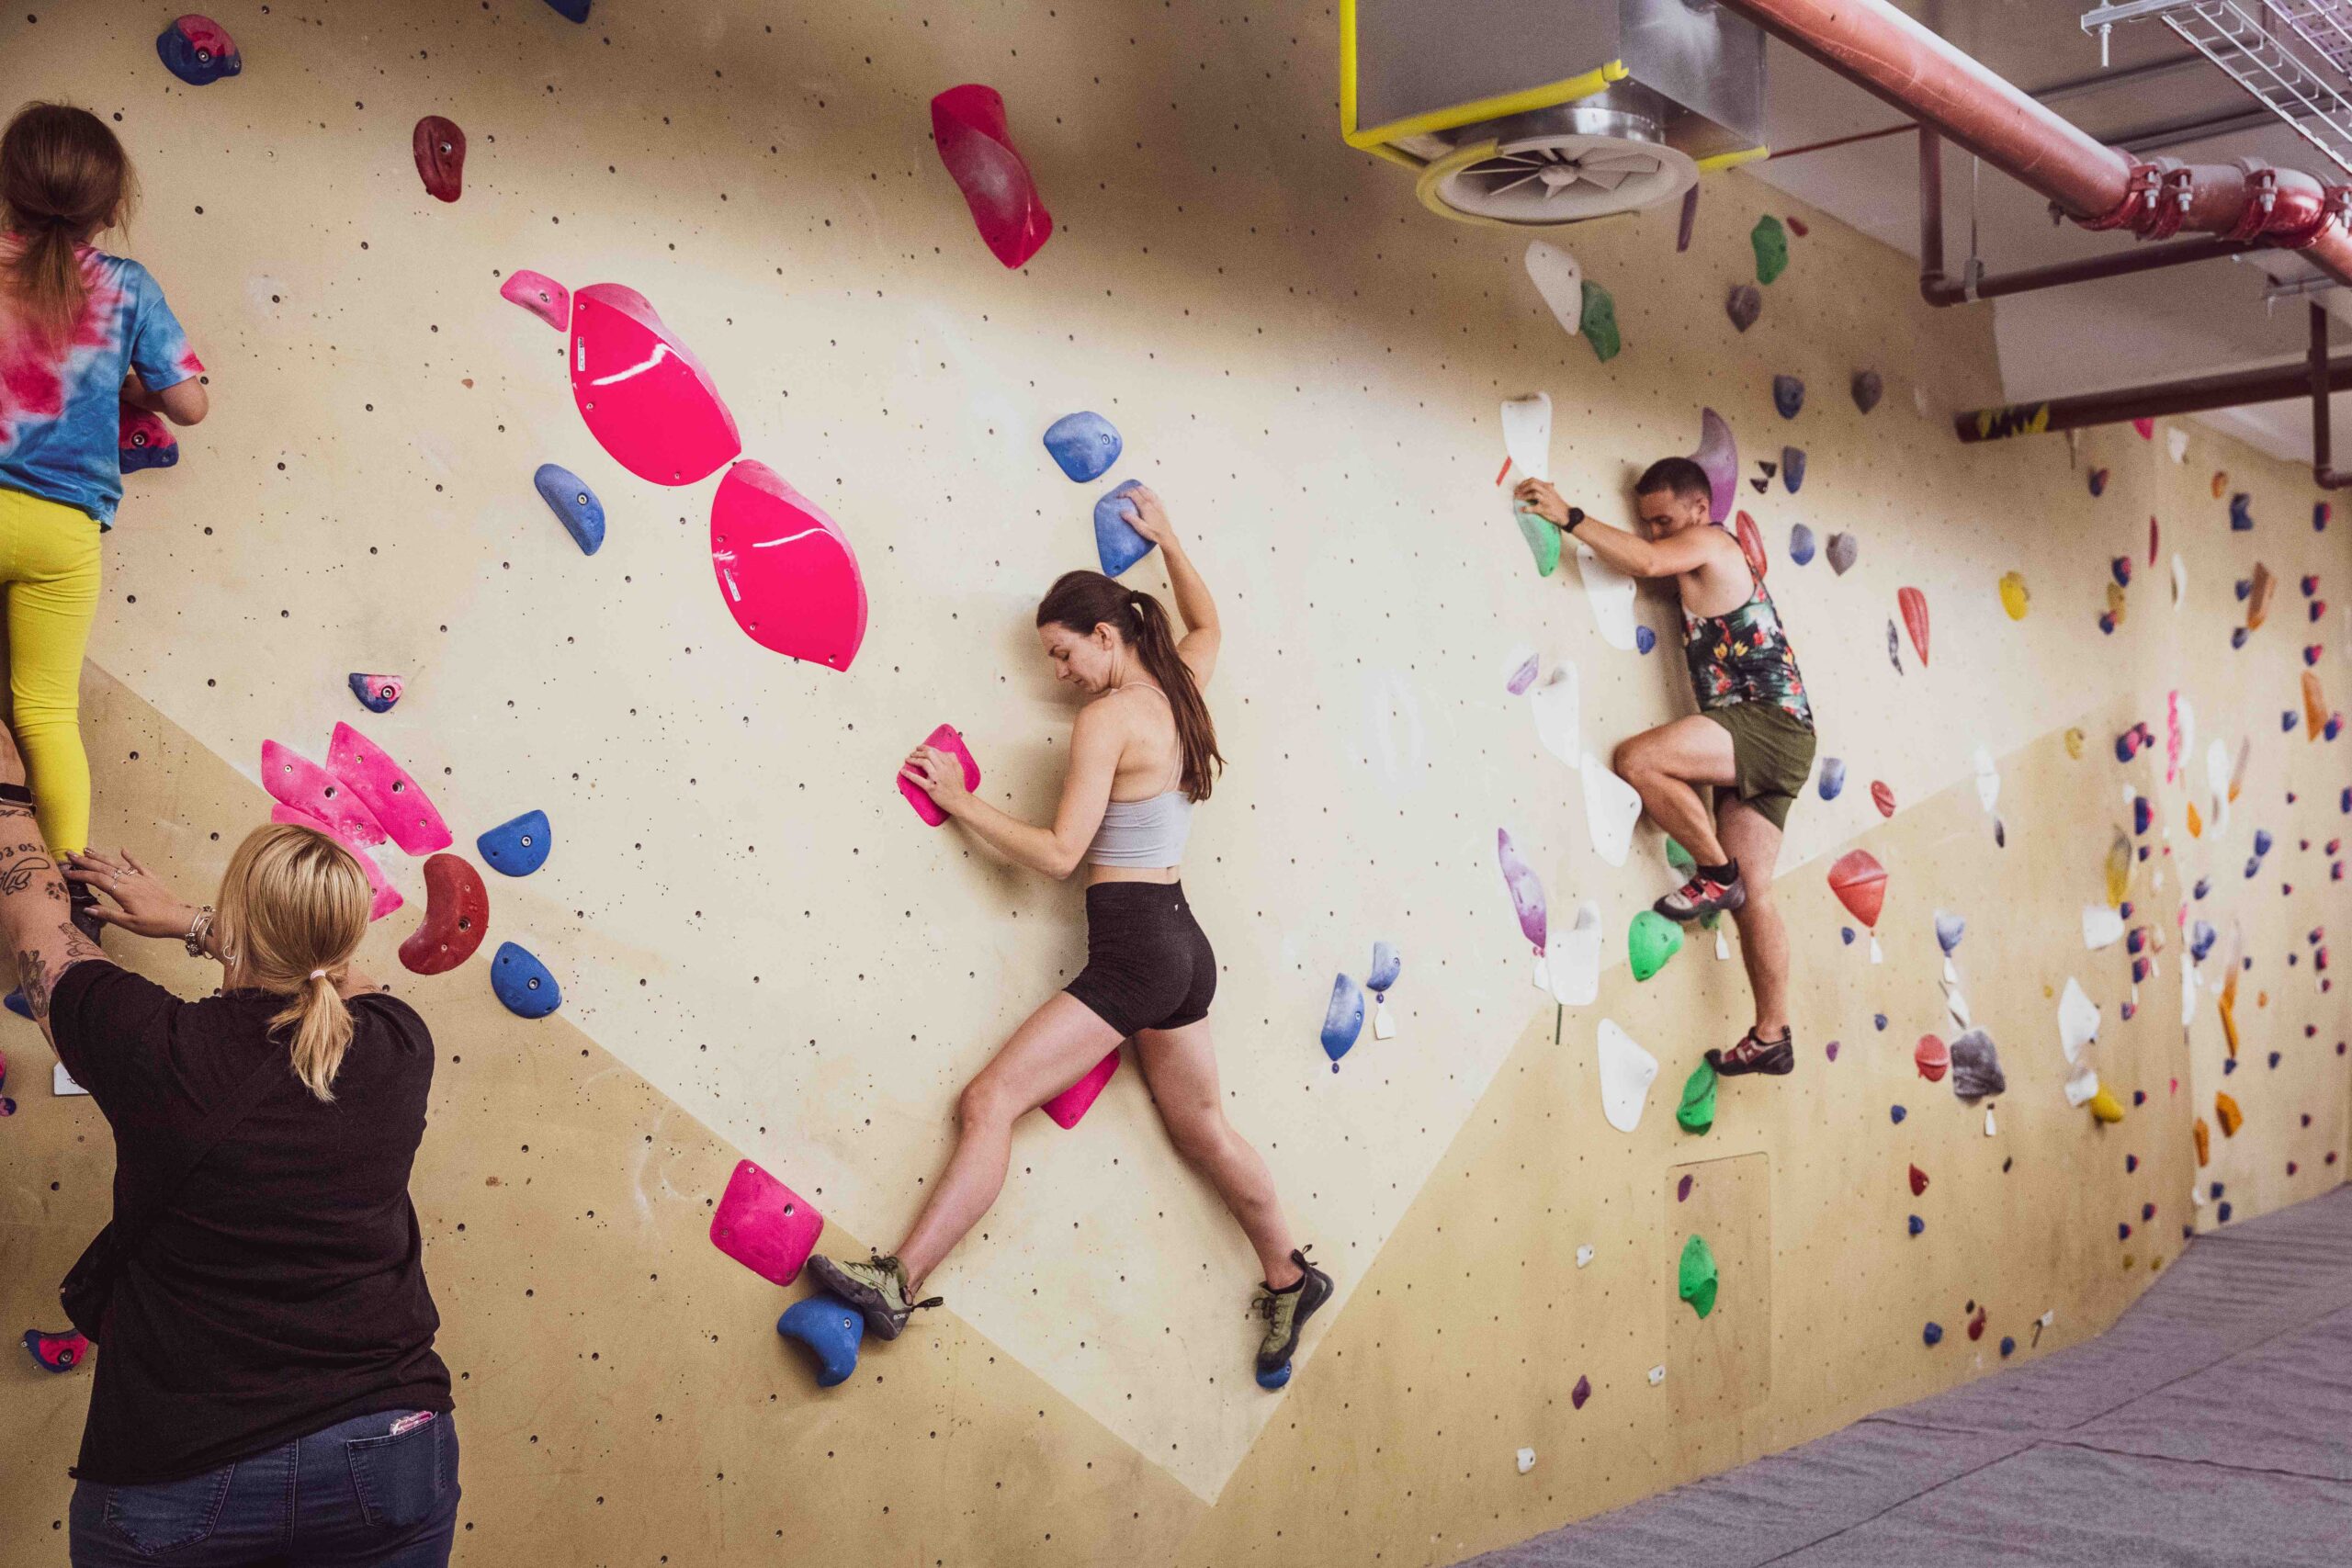 Everything you need to know about bouldering